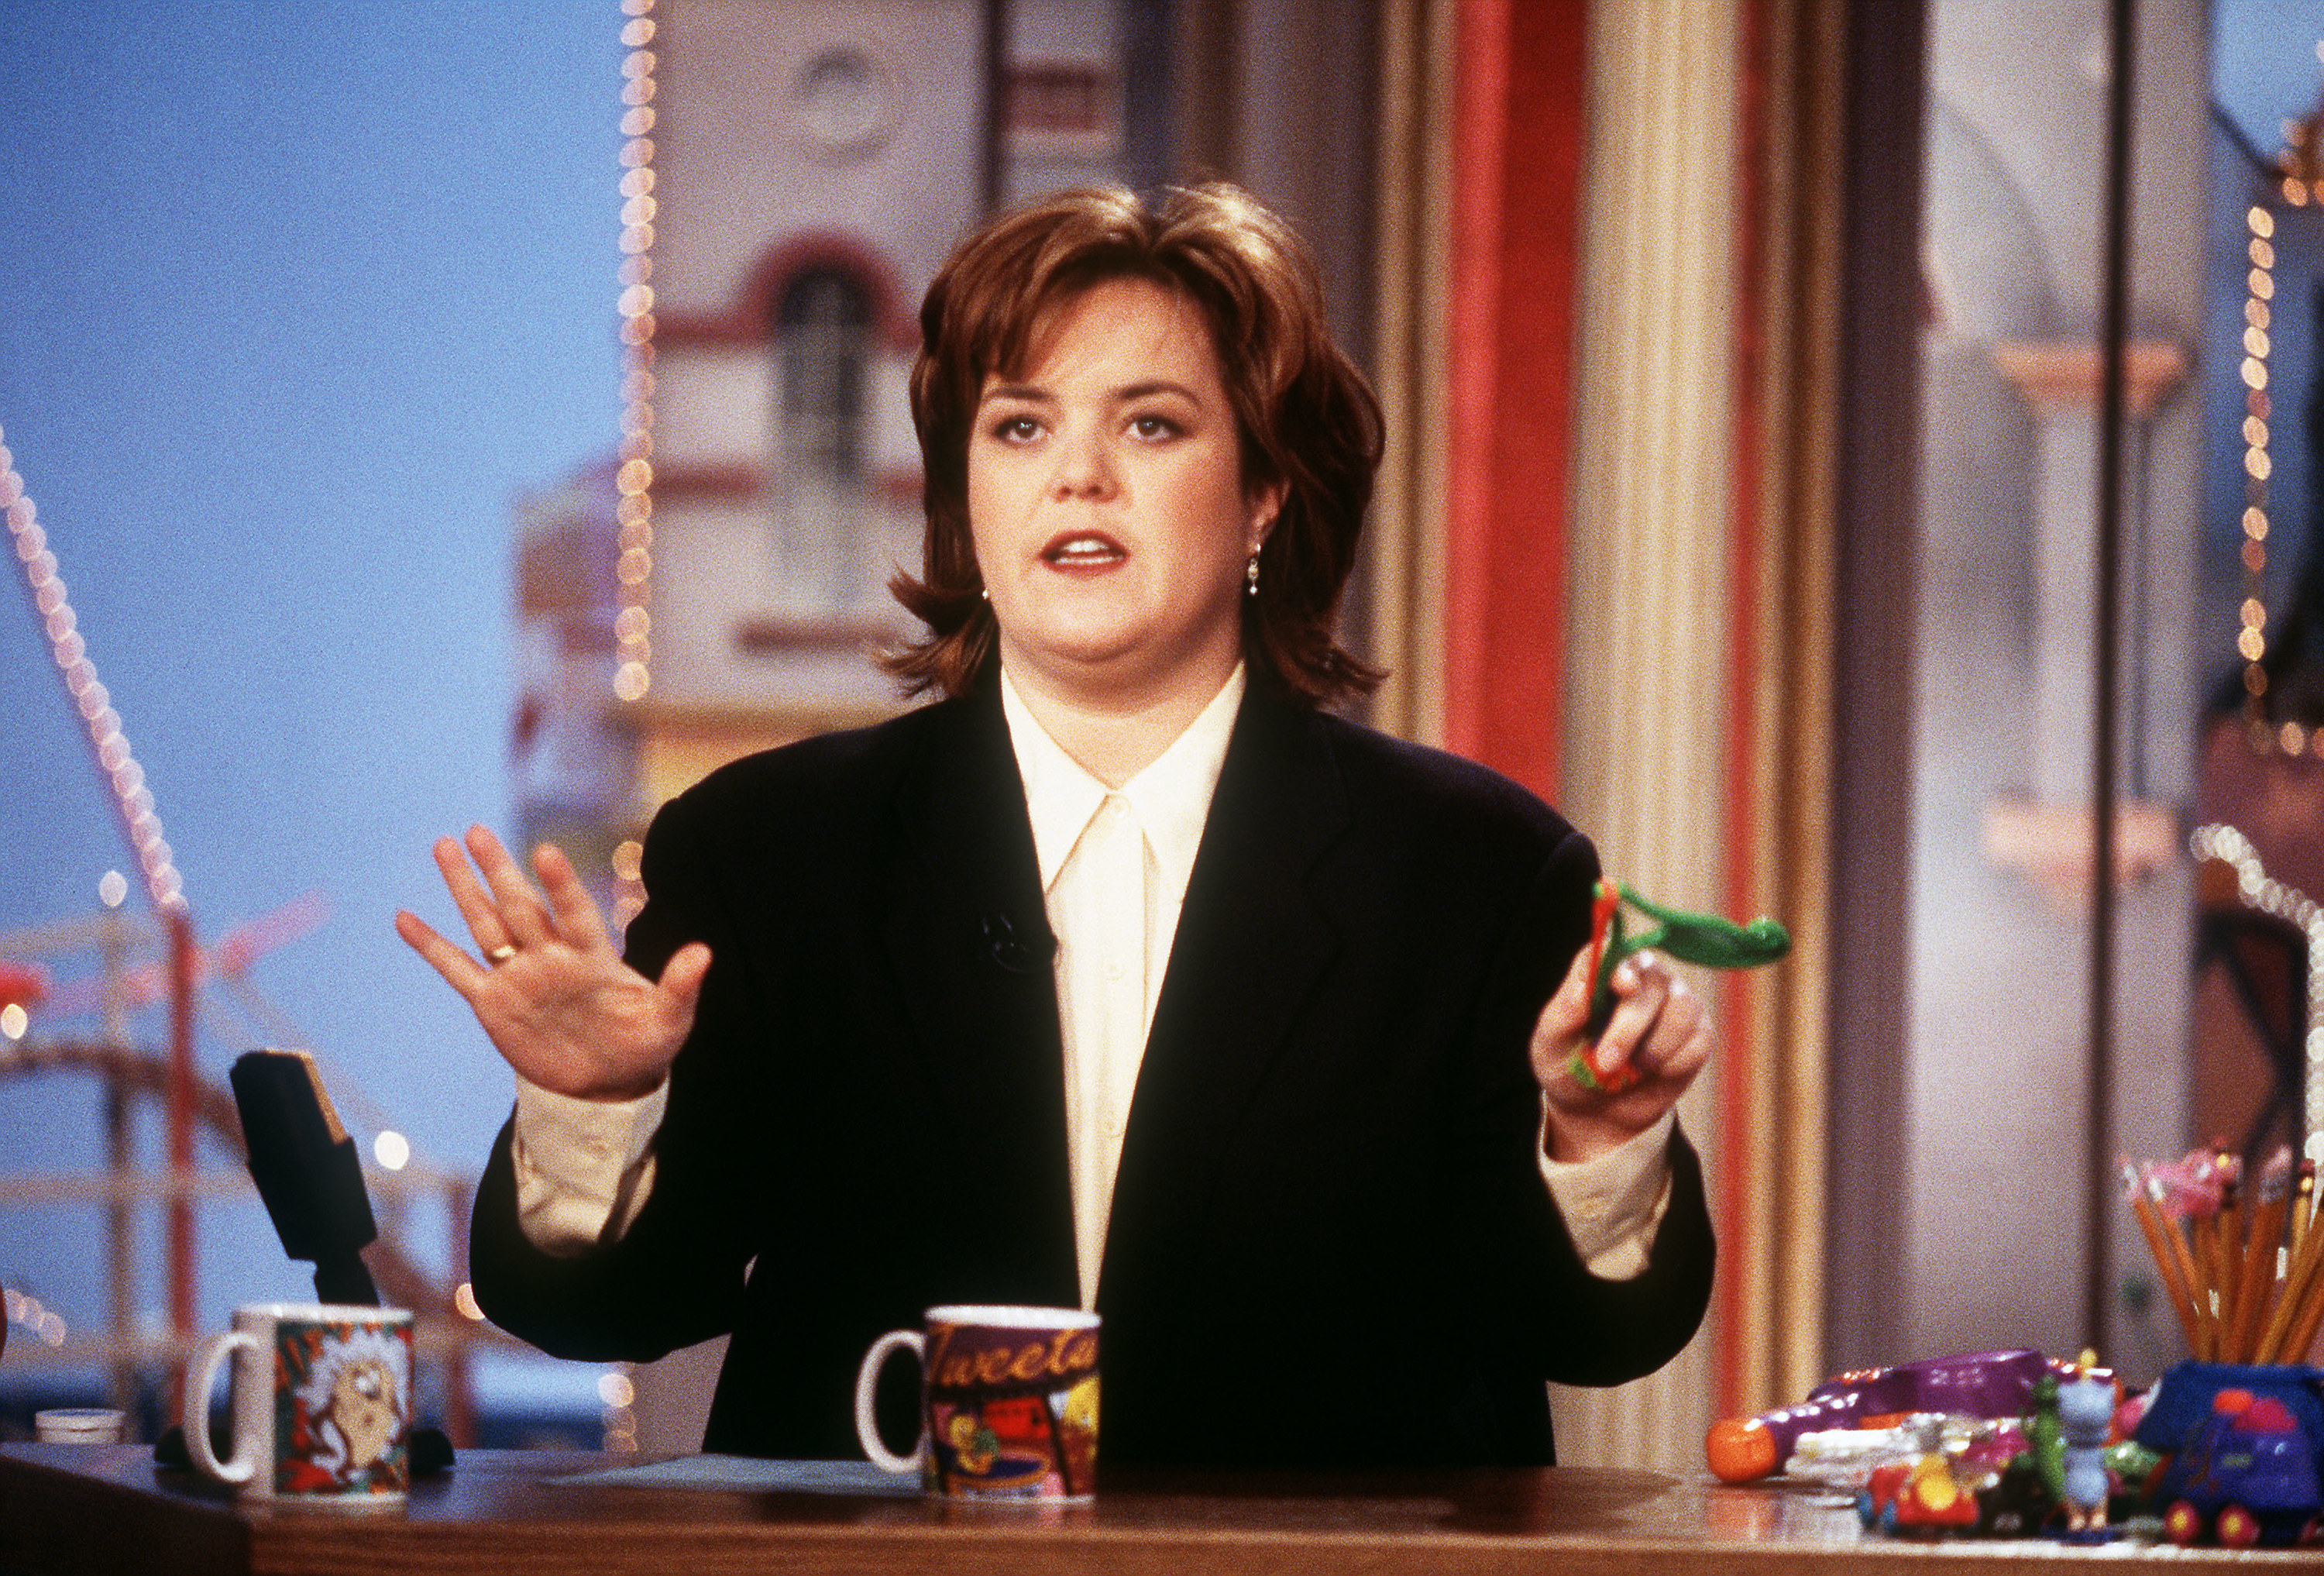 Photo of Rosie O&#x27;Donnell at her desk on the show